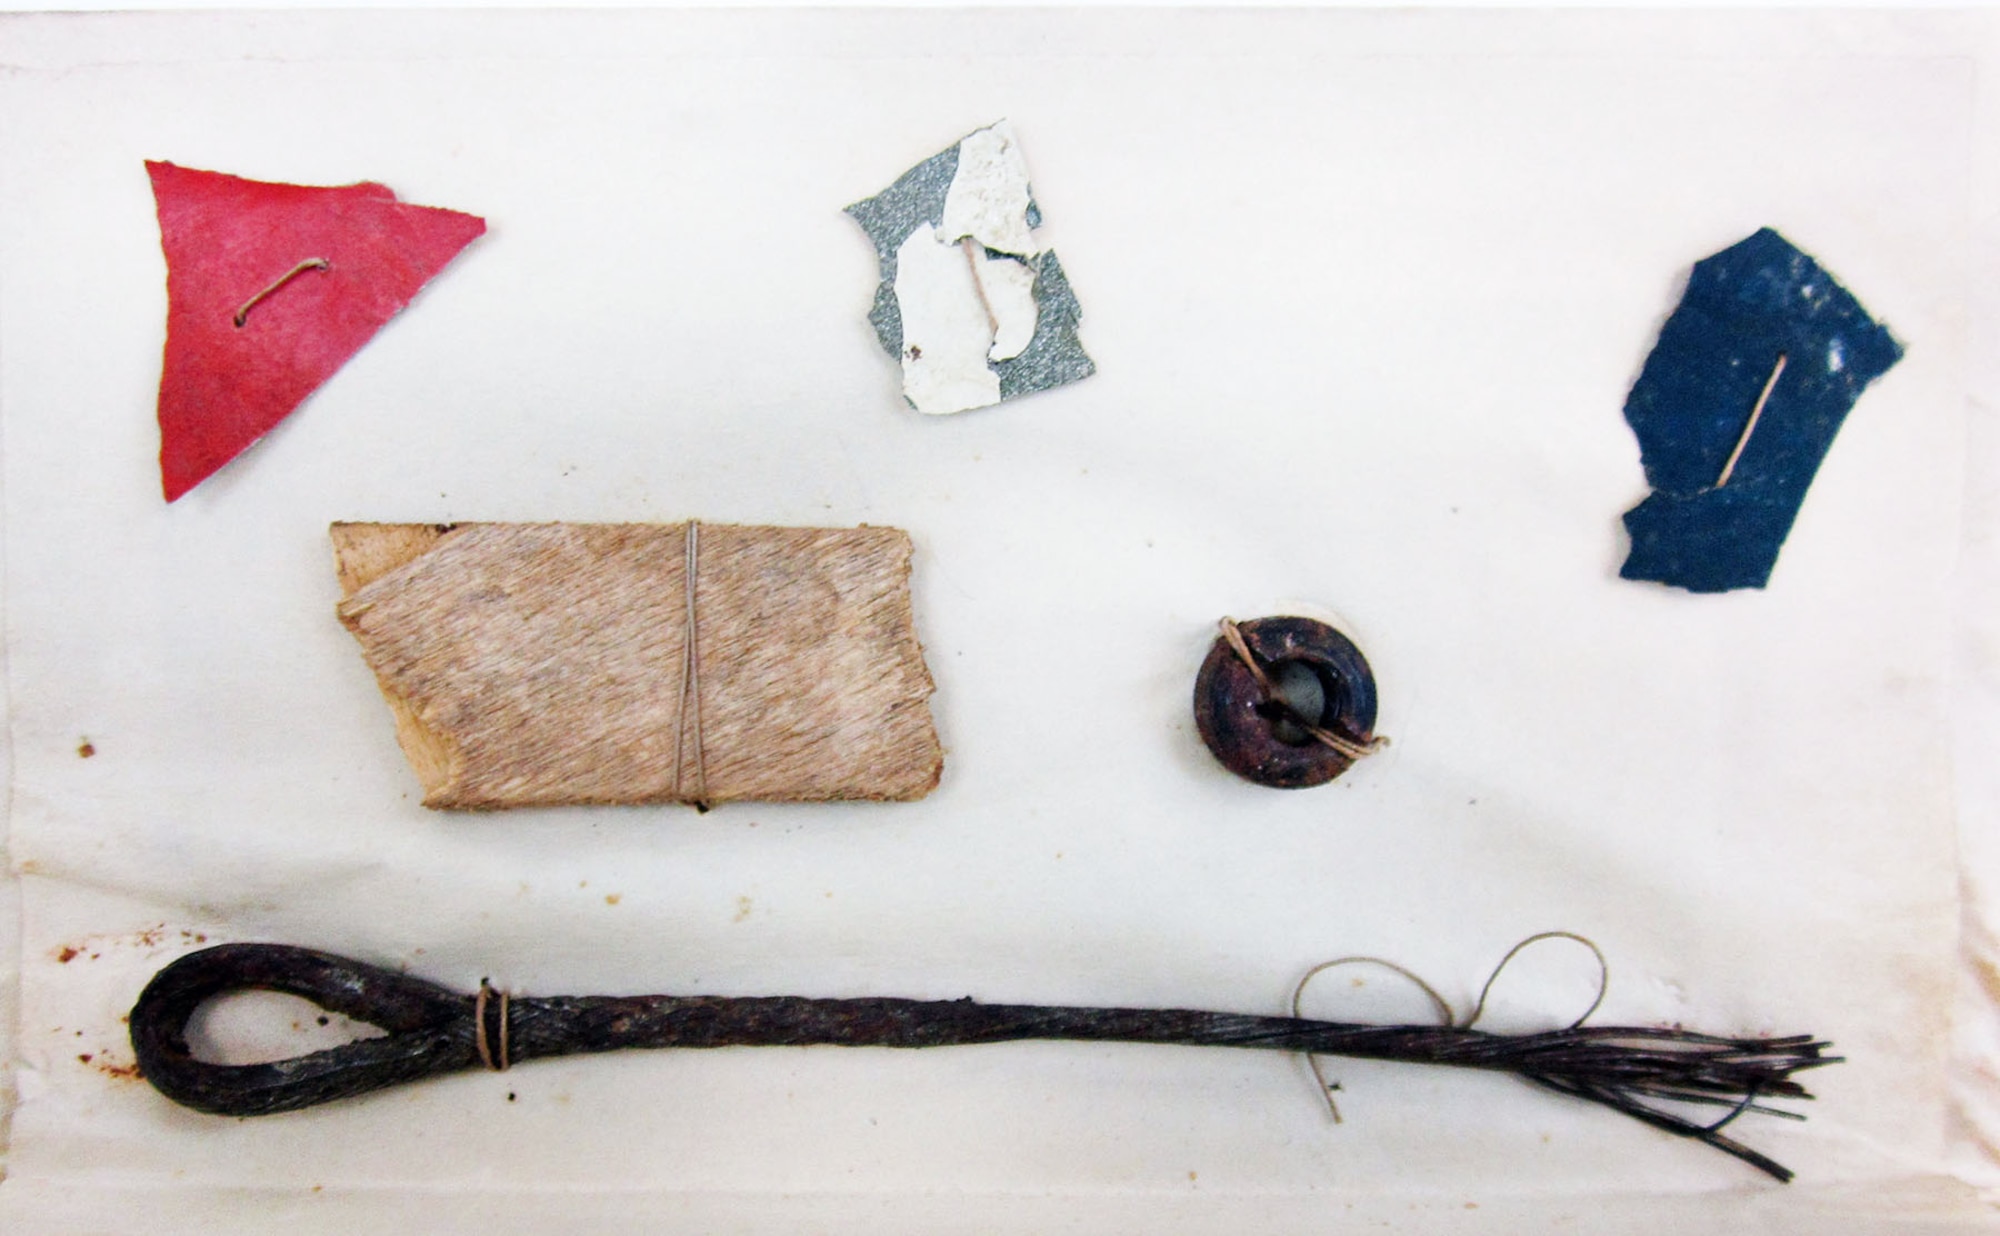 These six pieces of aircraft were taken from Lt. Quentin Roosevelt's Nieuport 28 at the crash site by Sgt. Mark Thatcher on July 14, 1918. There are three small pieces of painted aircraft fabric (red, white, blue), a small piece of wood and two pieces of hardware (nut and wire). Roosevelt, the son of former President Theodore Roosevelt, arrived in France during World War I as a supply officer and trained to become a pilot. As a pilot, he flew a Nieuport 28 with the 95th Aero Squadron. Roosevelt died when his plane was shot down behind German lines by Sgt. Karl Thom, a German ace with 24 victories, on July 14, 1918. (U.S. Air Force photo)